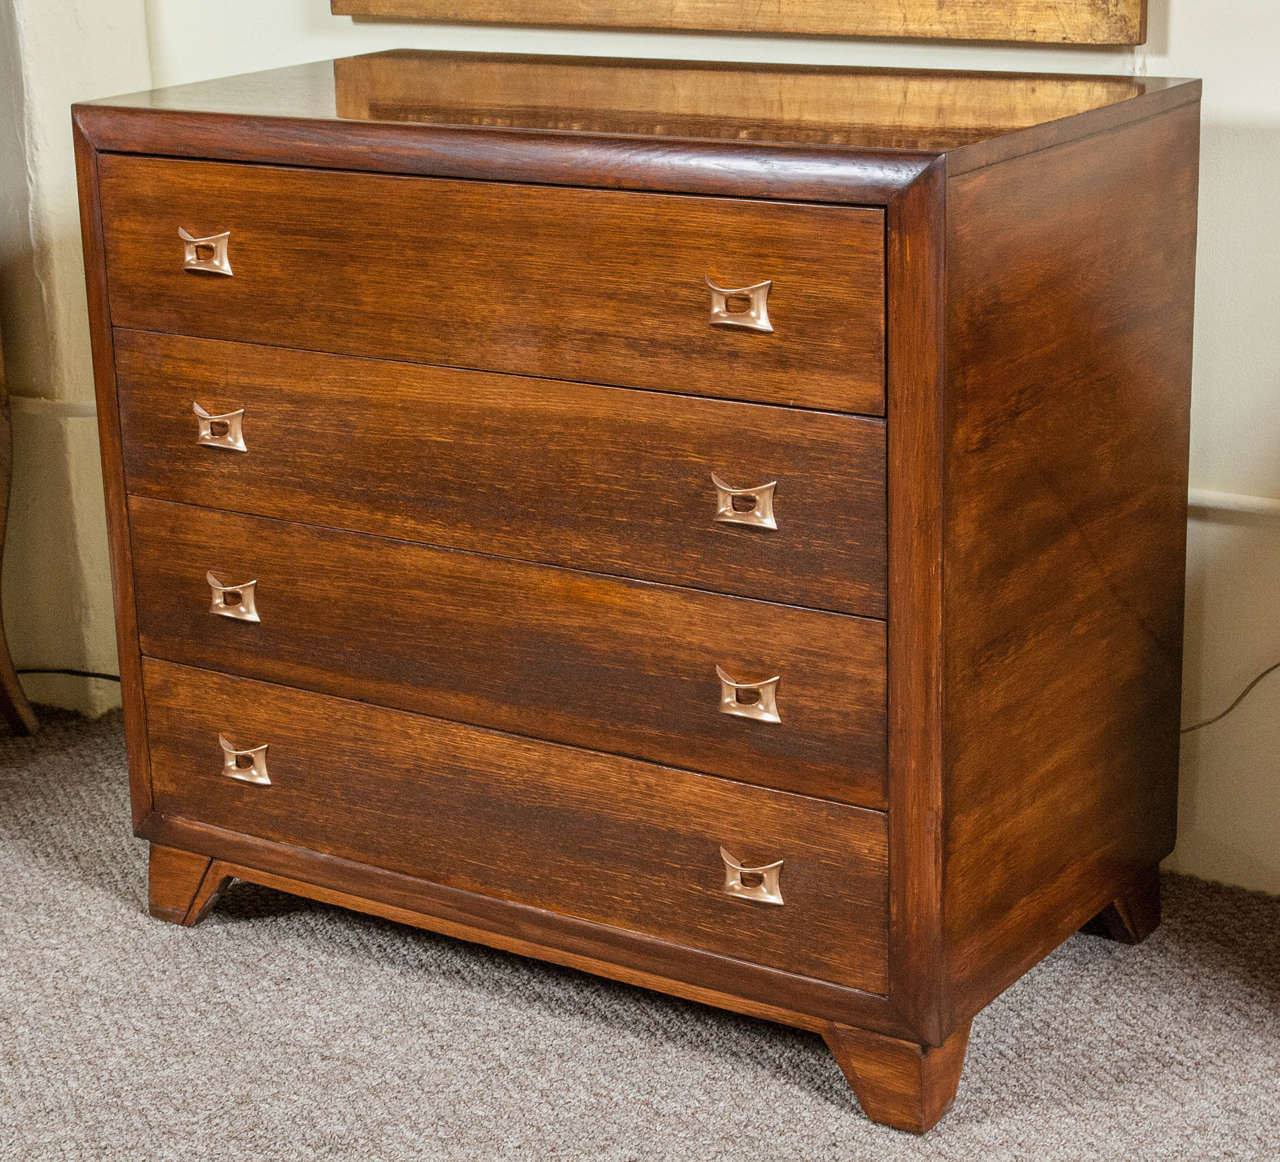 Mid-Century commode chest with brass pulls. The top two drawers have three removable wooden slide dividers. The bottom two drawers are not divided. This is a spacious piece that is clean lined and functional. Custom cabinet maker made this chest. It